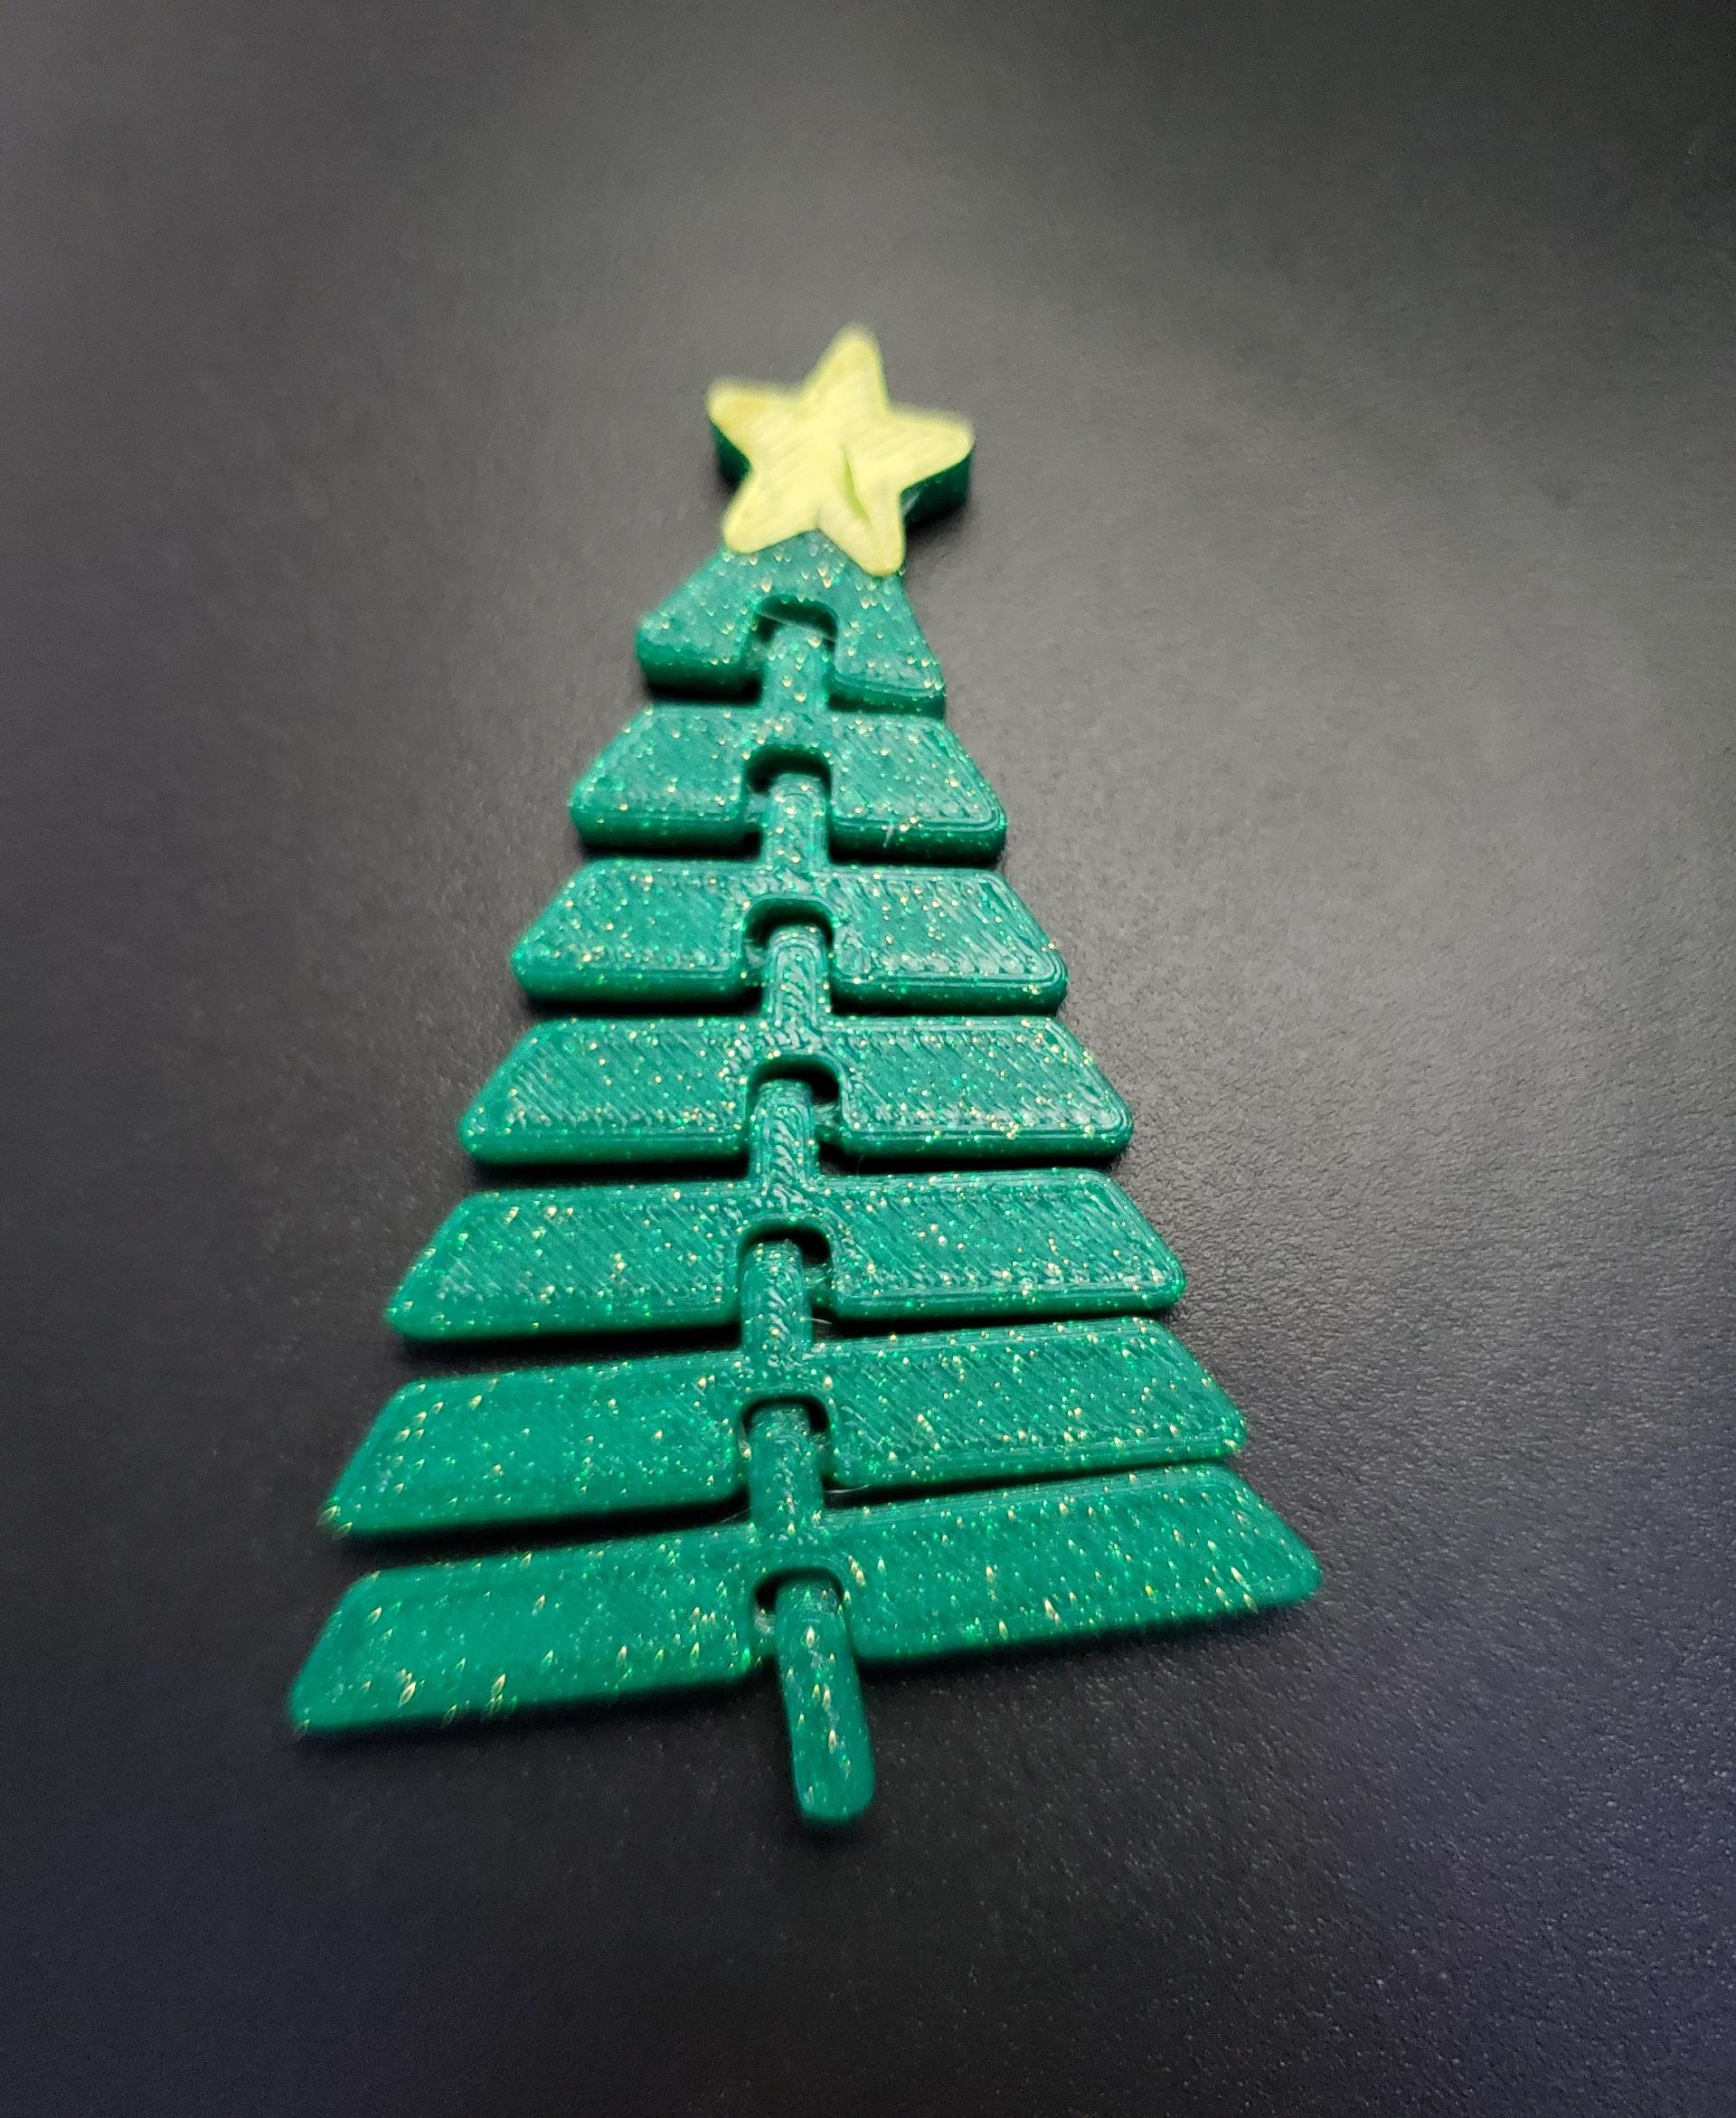 Articulated Christmas Tree with Star - Print in place fidget toy - 3mf - protopasta forest fantasy green - 3d model